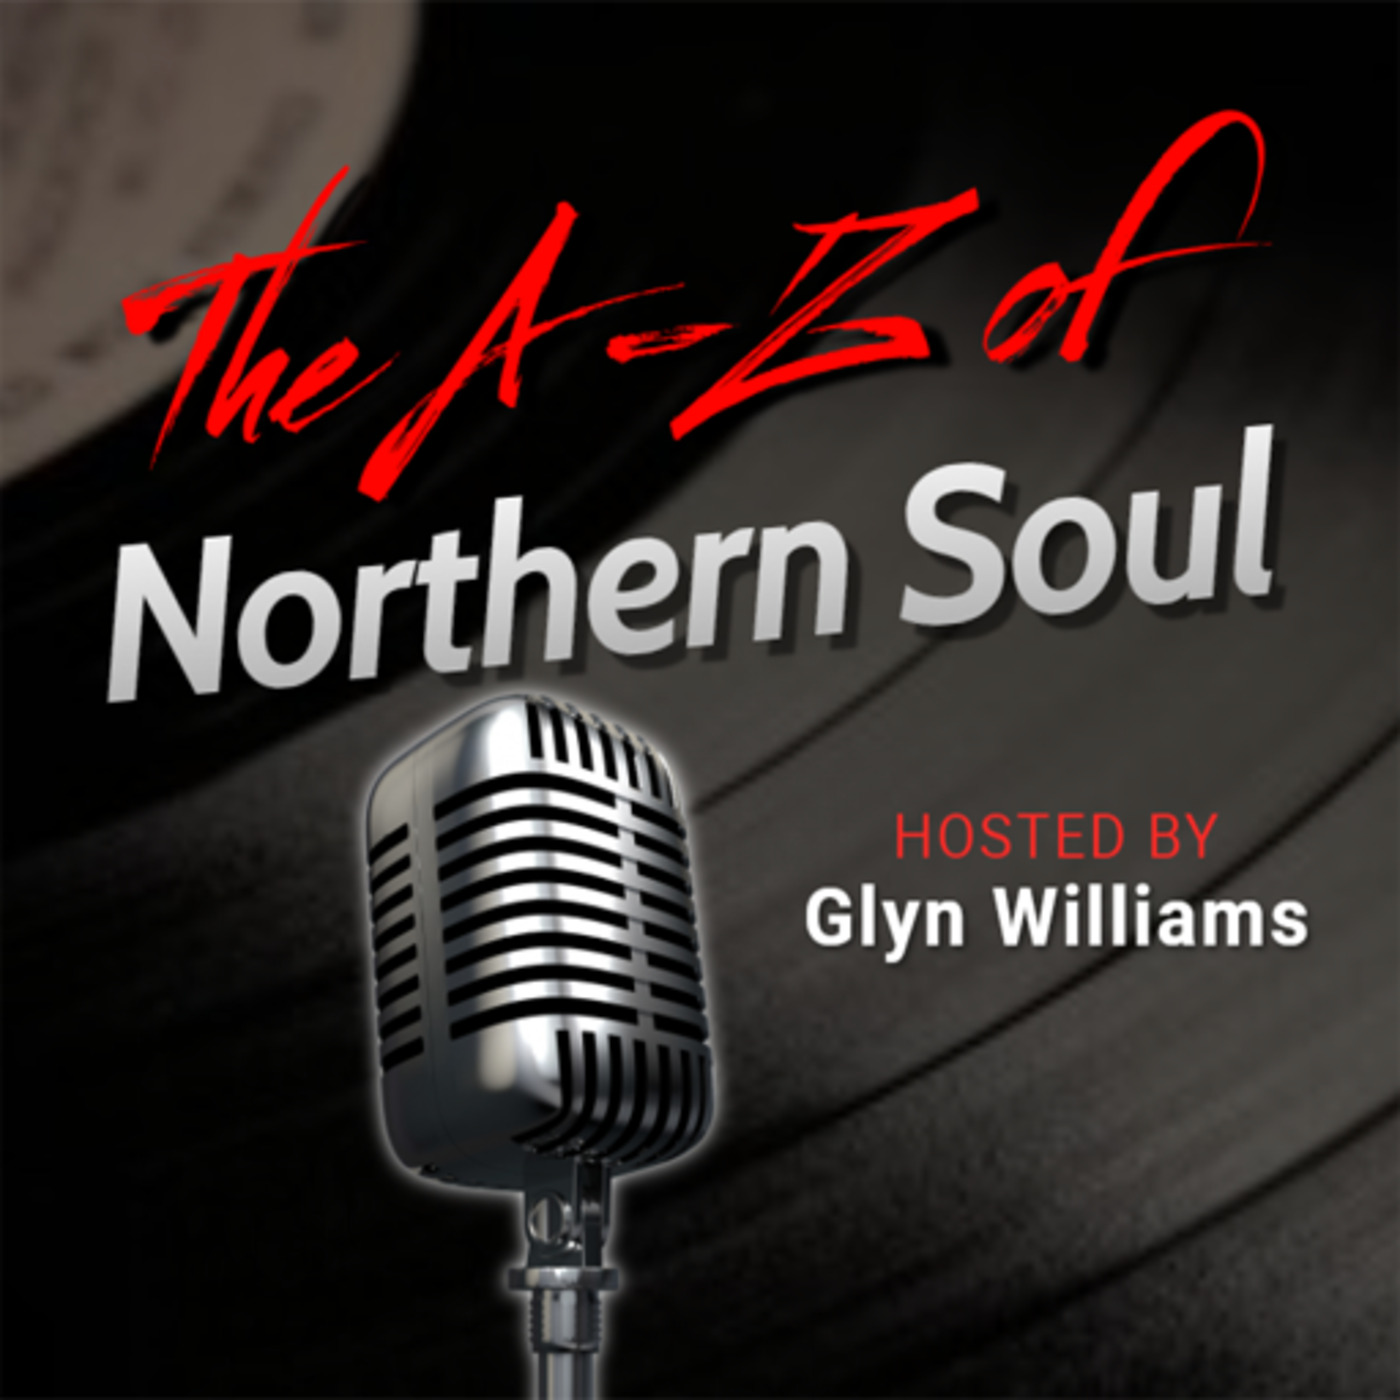 The A-Z of Northern Soul E046